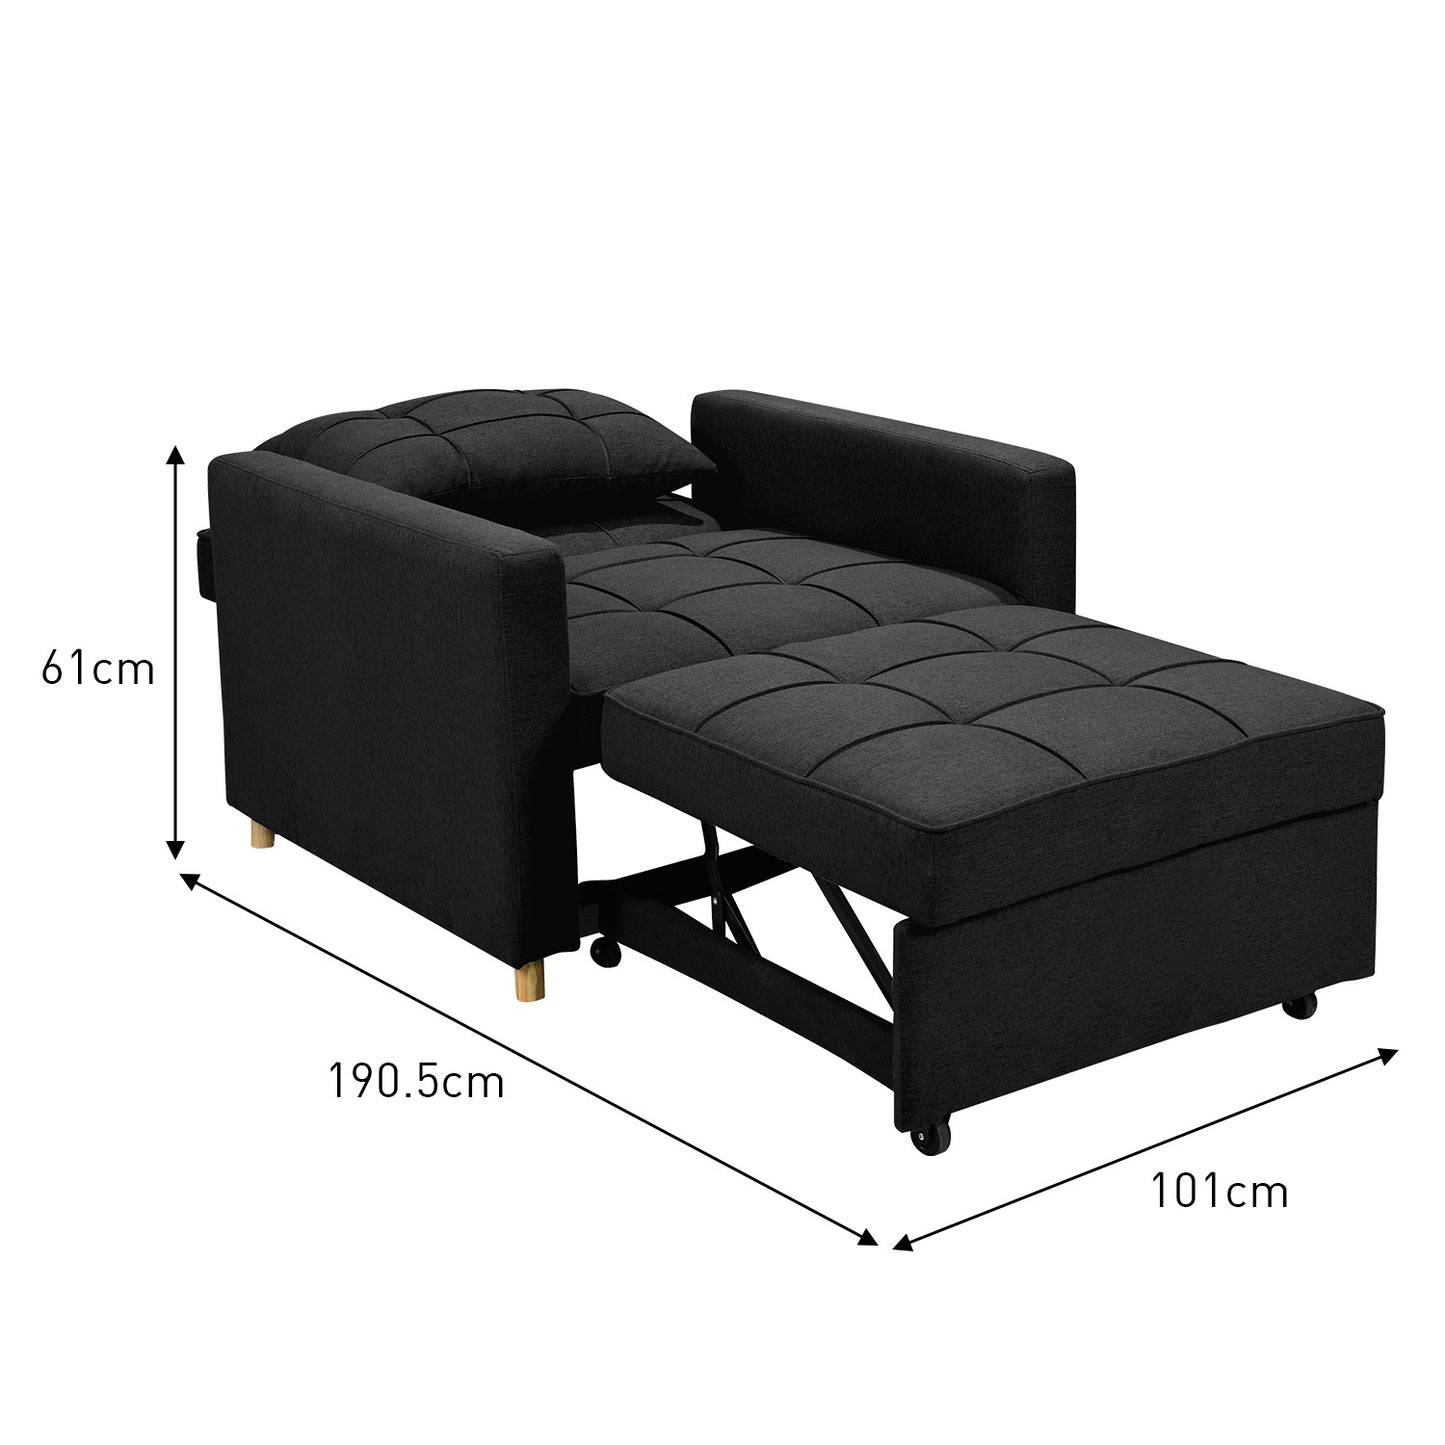 Suri 3-in-1 Convertible Lounge Chair Bed by Sarantino - Black